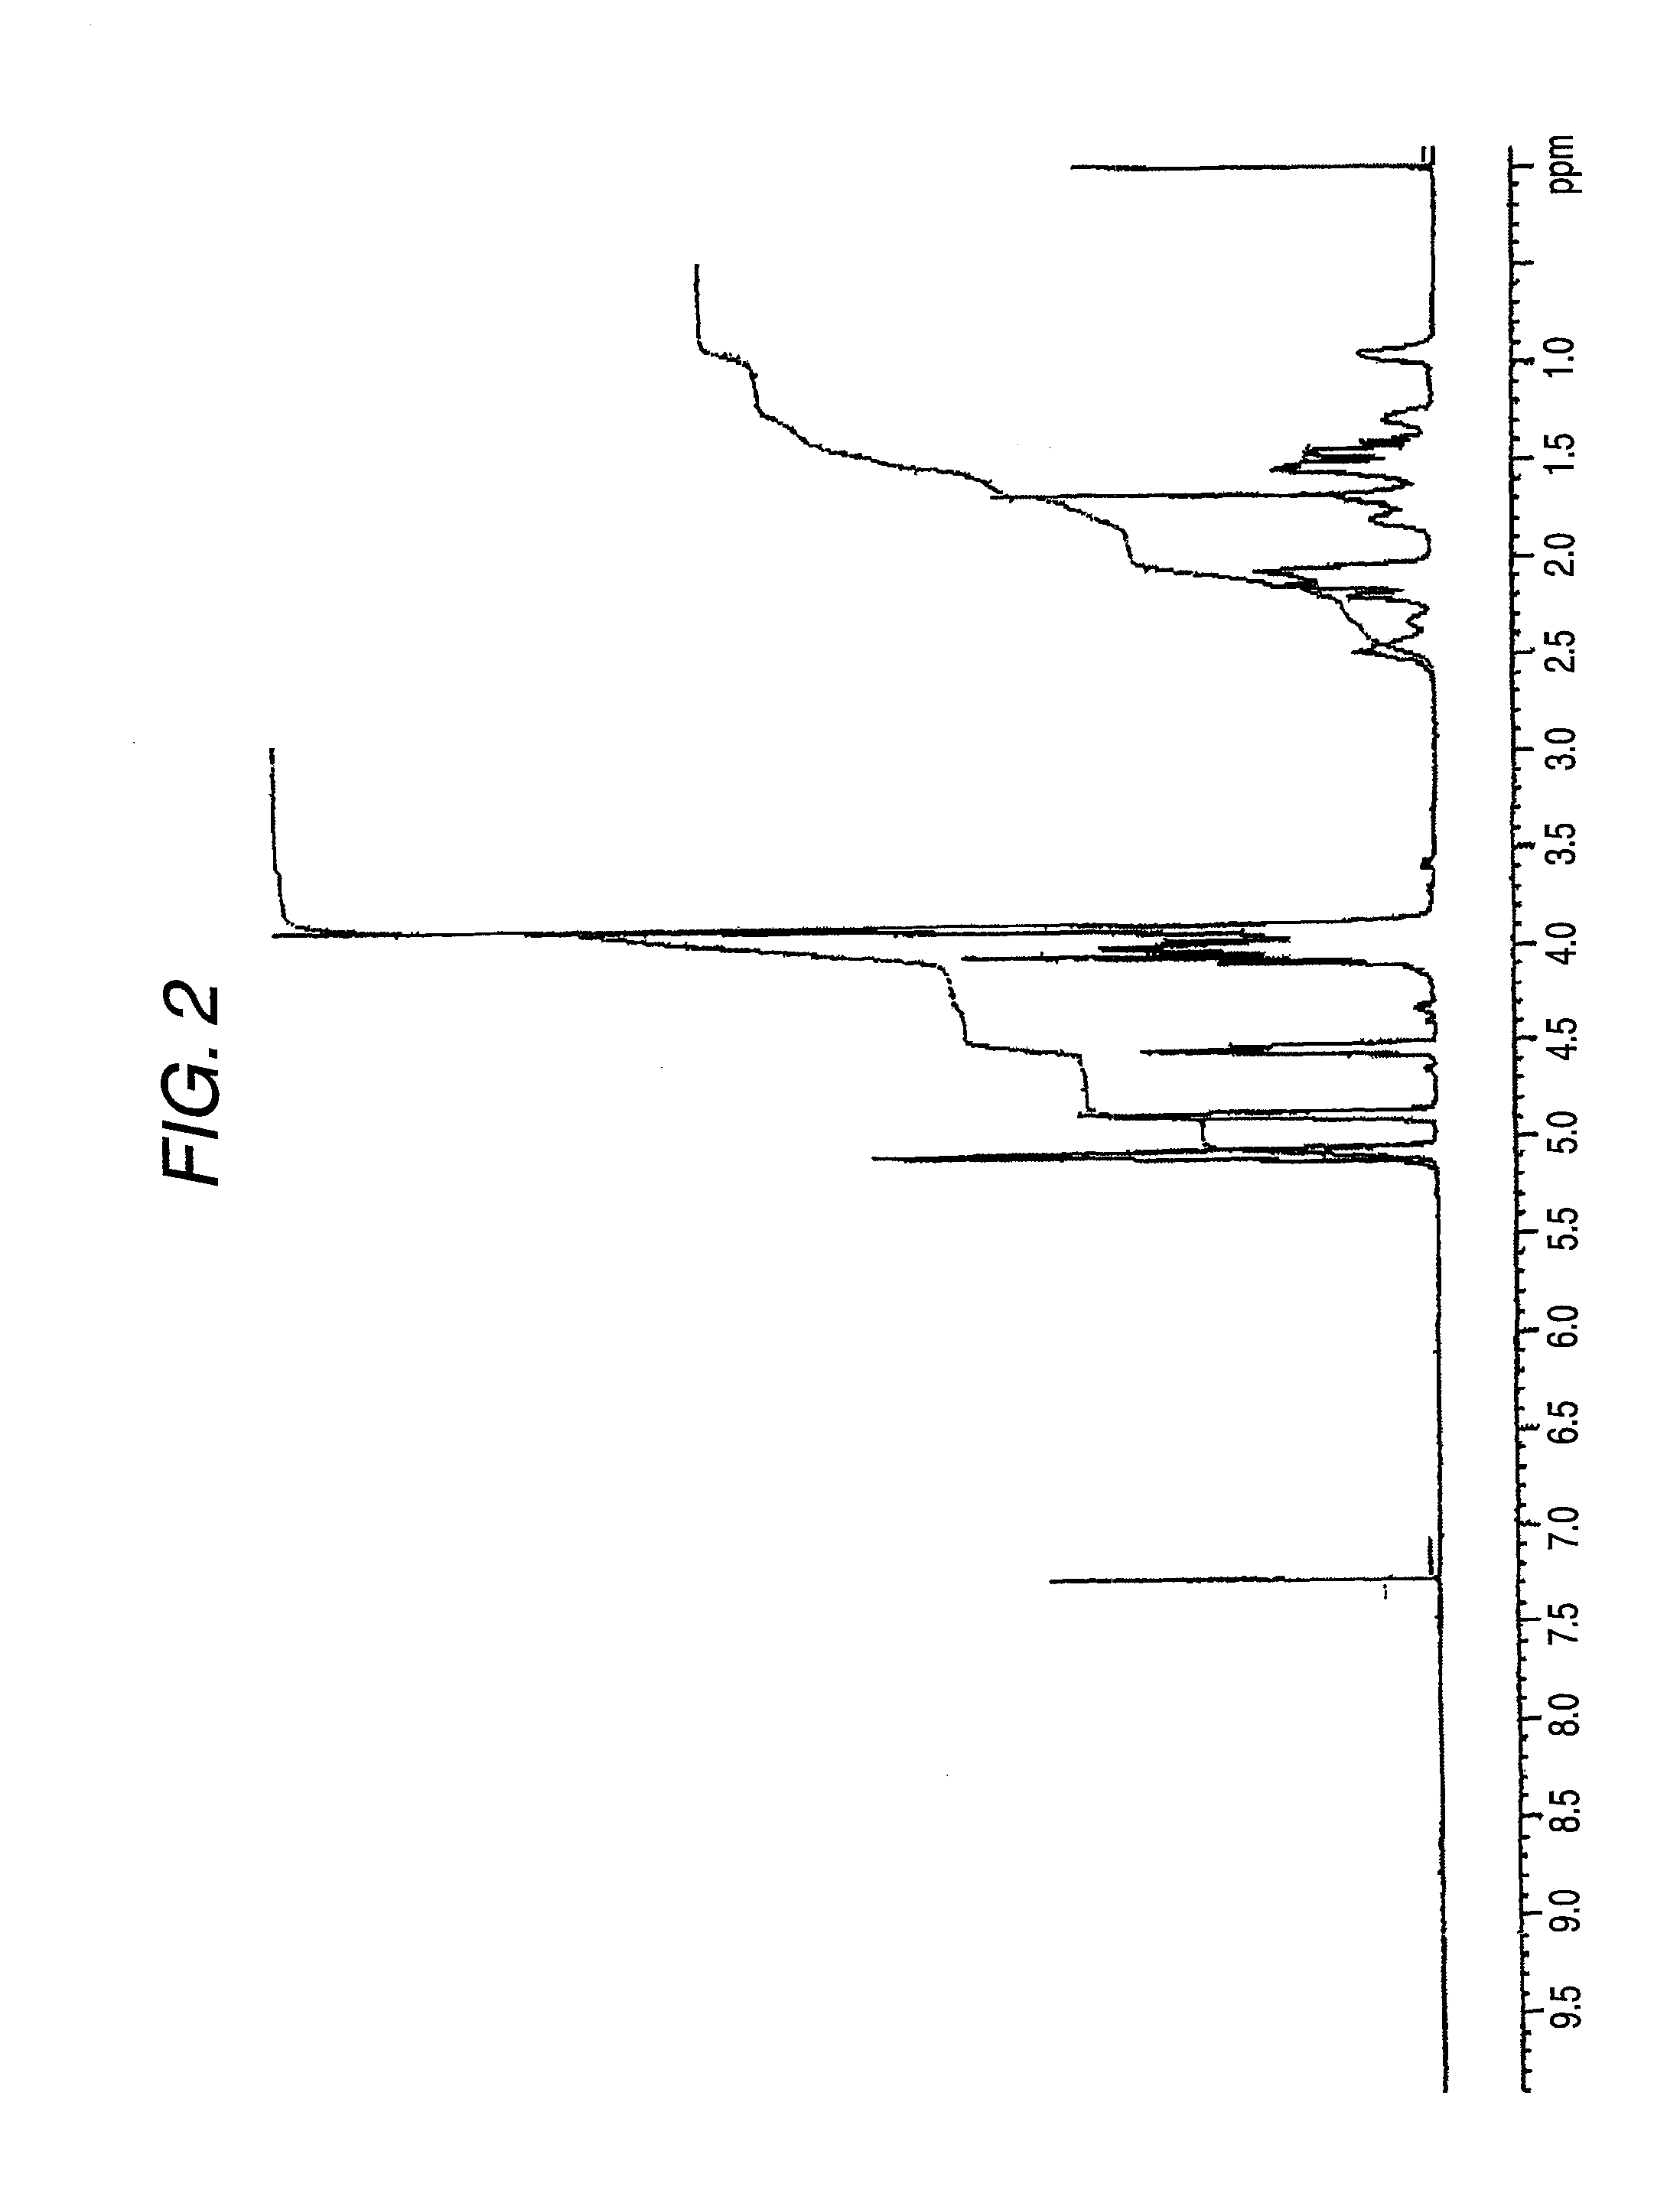 Polycarbonate copolymer and method of producing the same